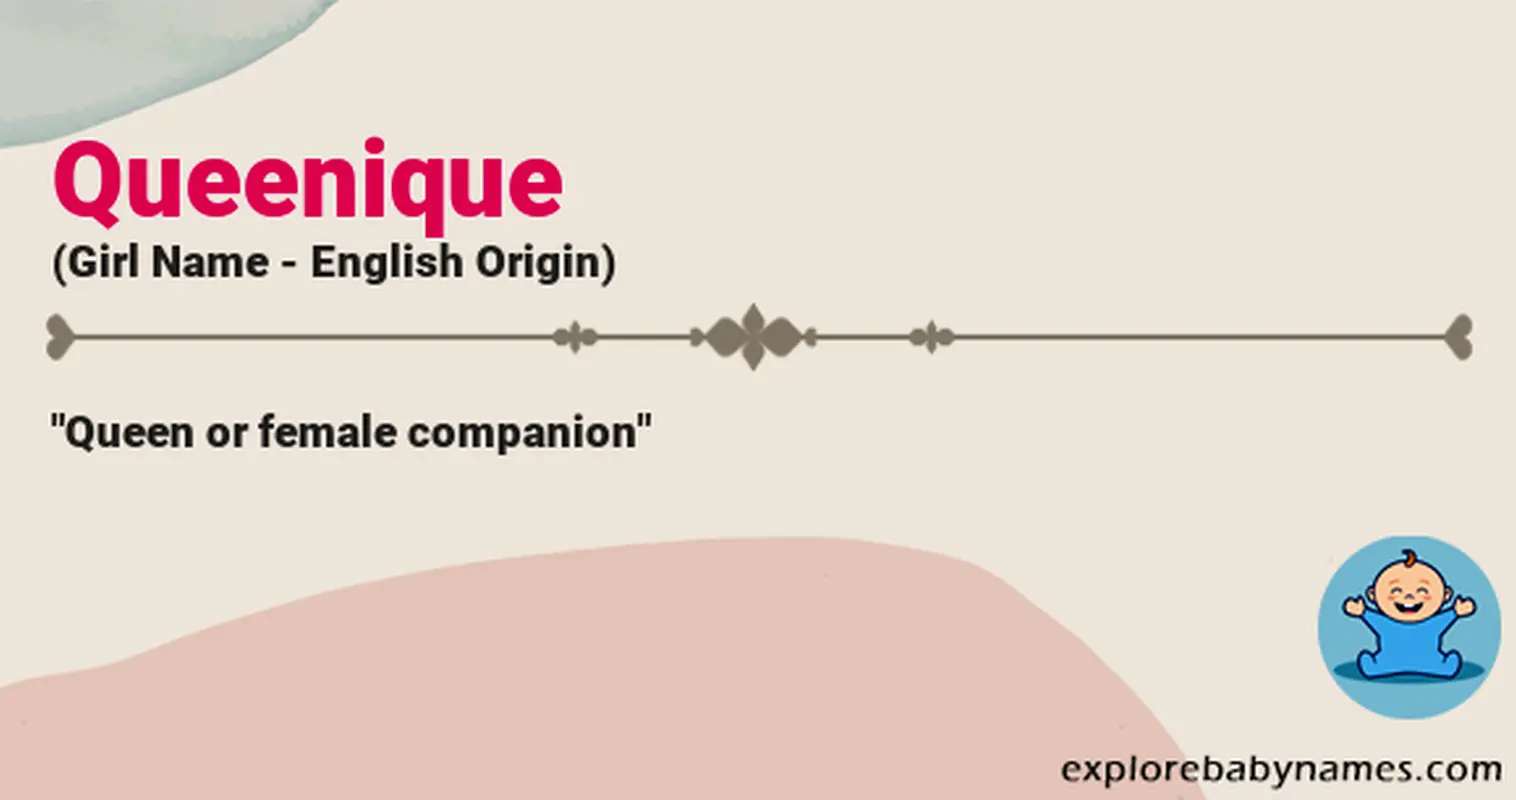 Meaning of Queenique